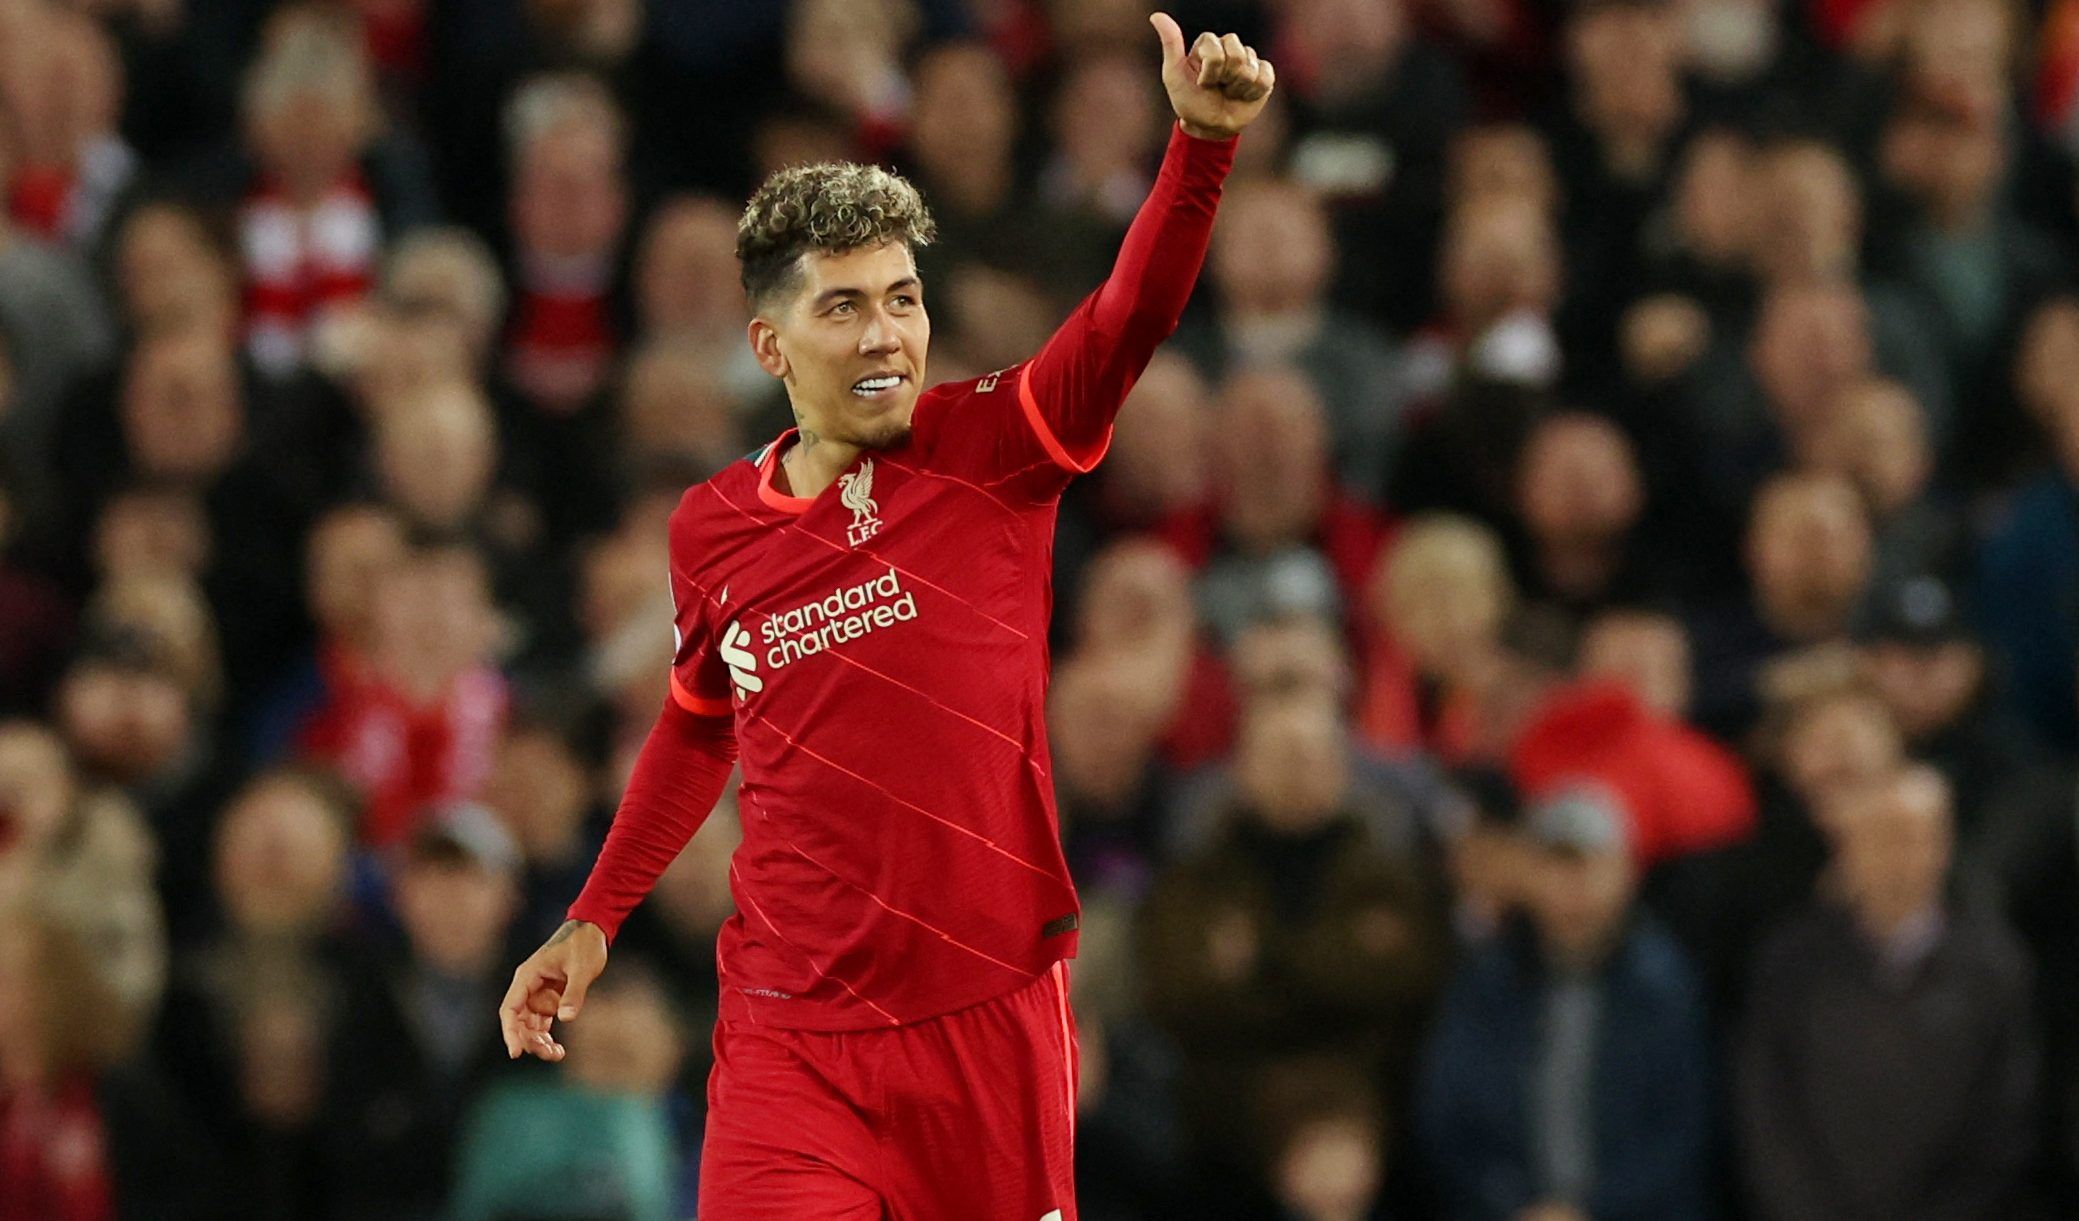 Soccer Football - Champions League - Quarter Final - Second Leg - Liverpool v Benfica - Anfield, Liverpool, Britain - April 13, 2022 Liverpool's Roberto Firmino celebrates scoring their third goal REUTERS/Phil Noble